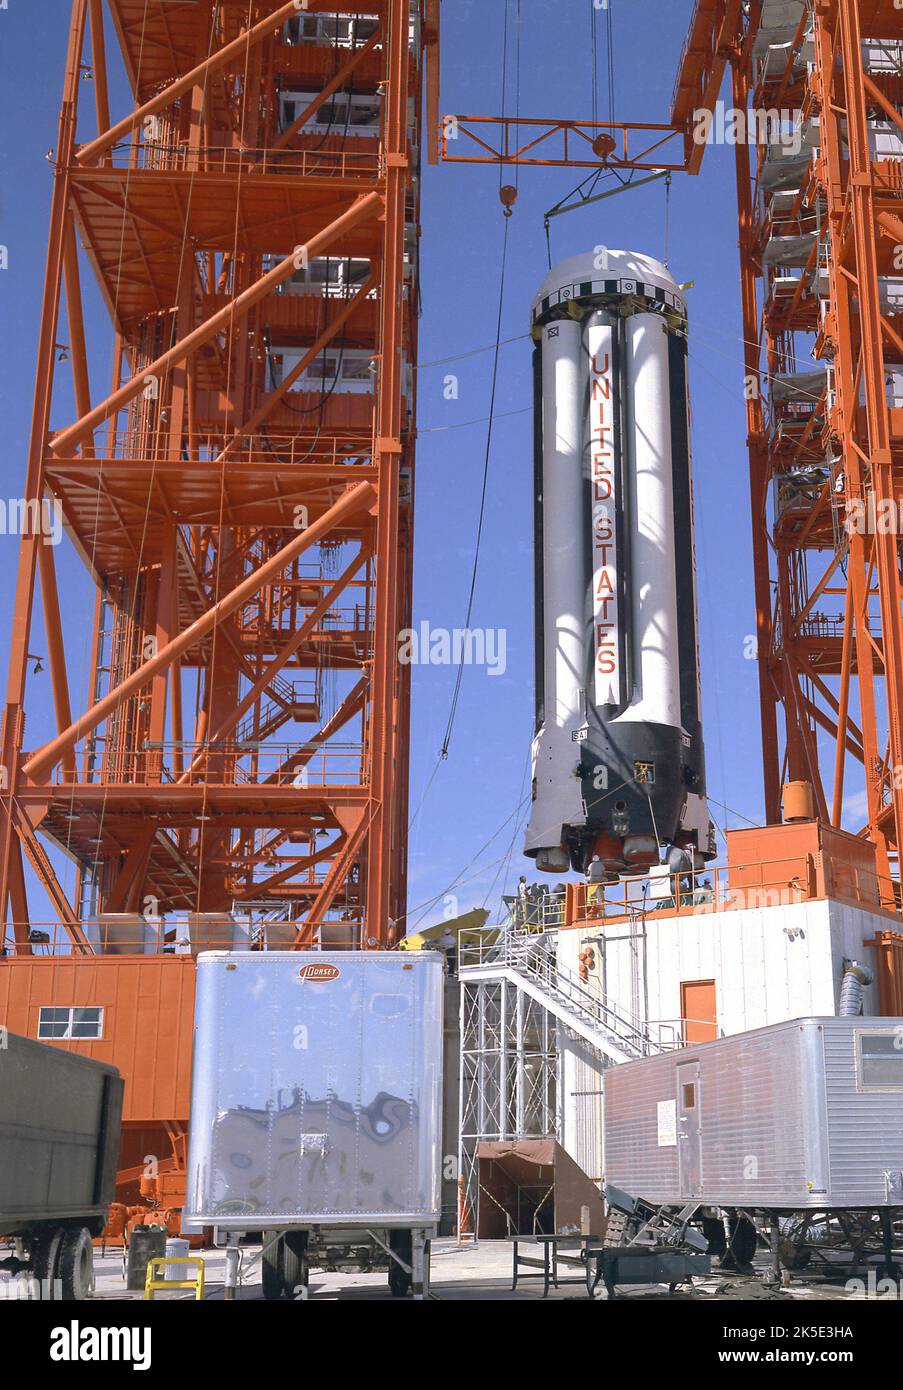 The First Saturn Rocket SA-1 arrives at NASA's Kennedy Space Center, Florida. The SA-1 mission was used to demonstrate the validity of the clustered engine concept as well as test the aerodynamic and structural design of the Saturn I booster. Here, the S-1 stage for the SA-1 mission is being installed on the launch pad for launch. Today, Marshall Space Center is developing NASA's Space Launch System, the most powerful rocket ever built that will be capable of sending astronauts deeper into space than ever before, including to Mars. 15 August 1961. An optimised NASA image: Credit: NASA Stock Photo